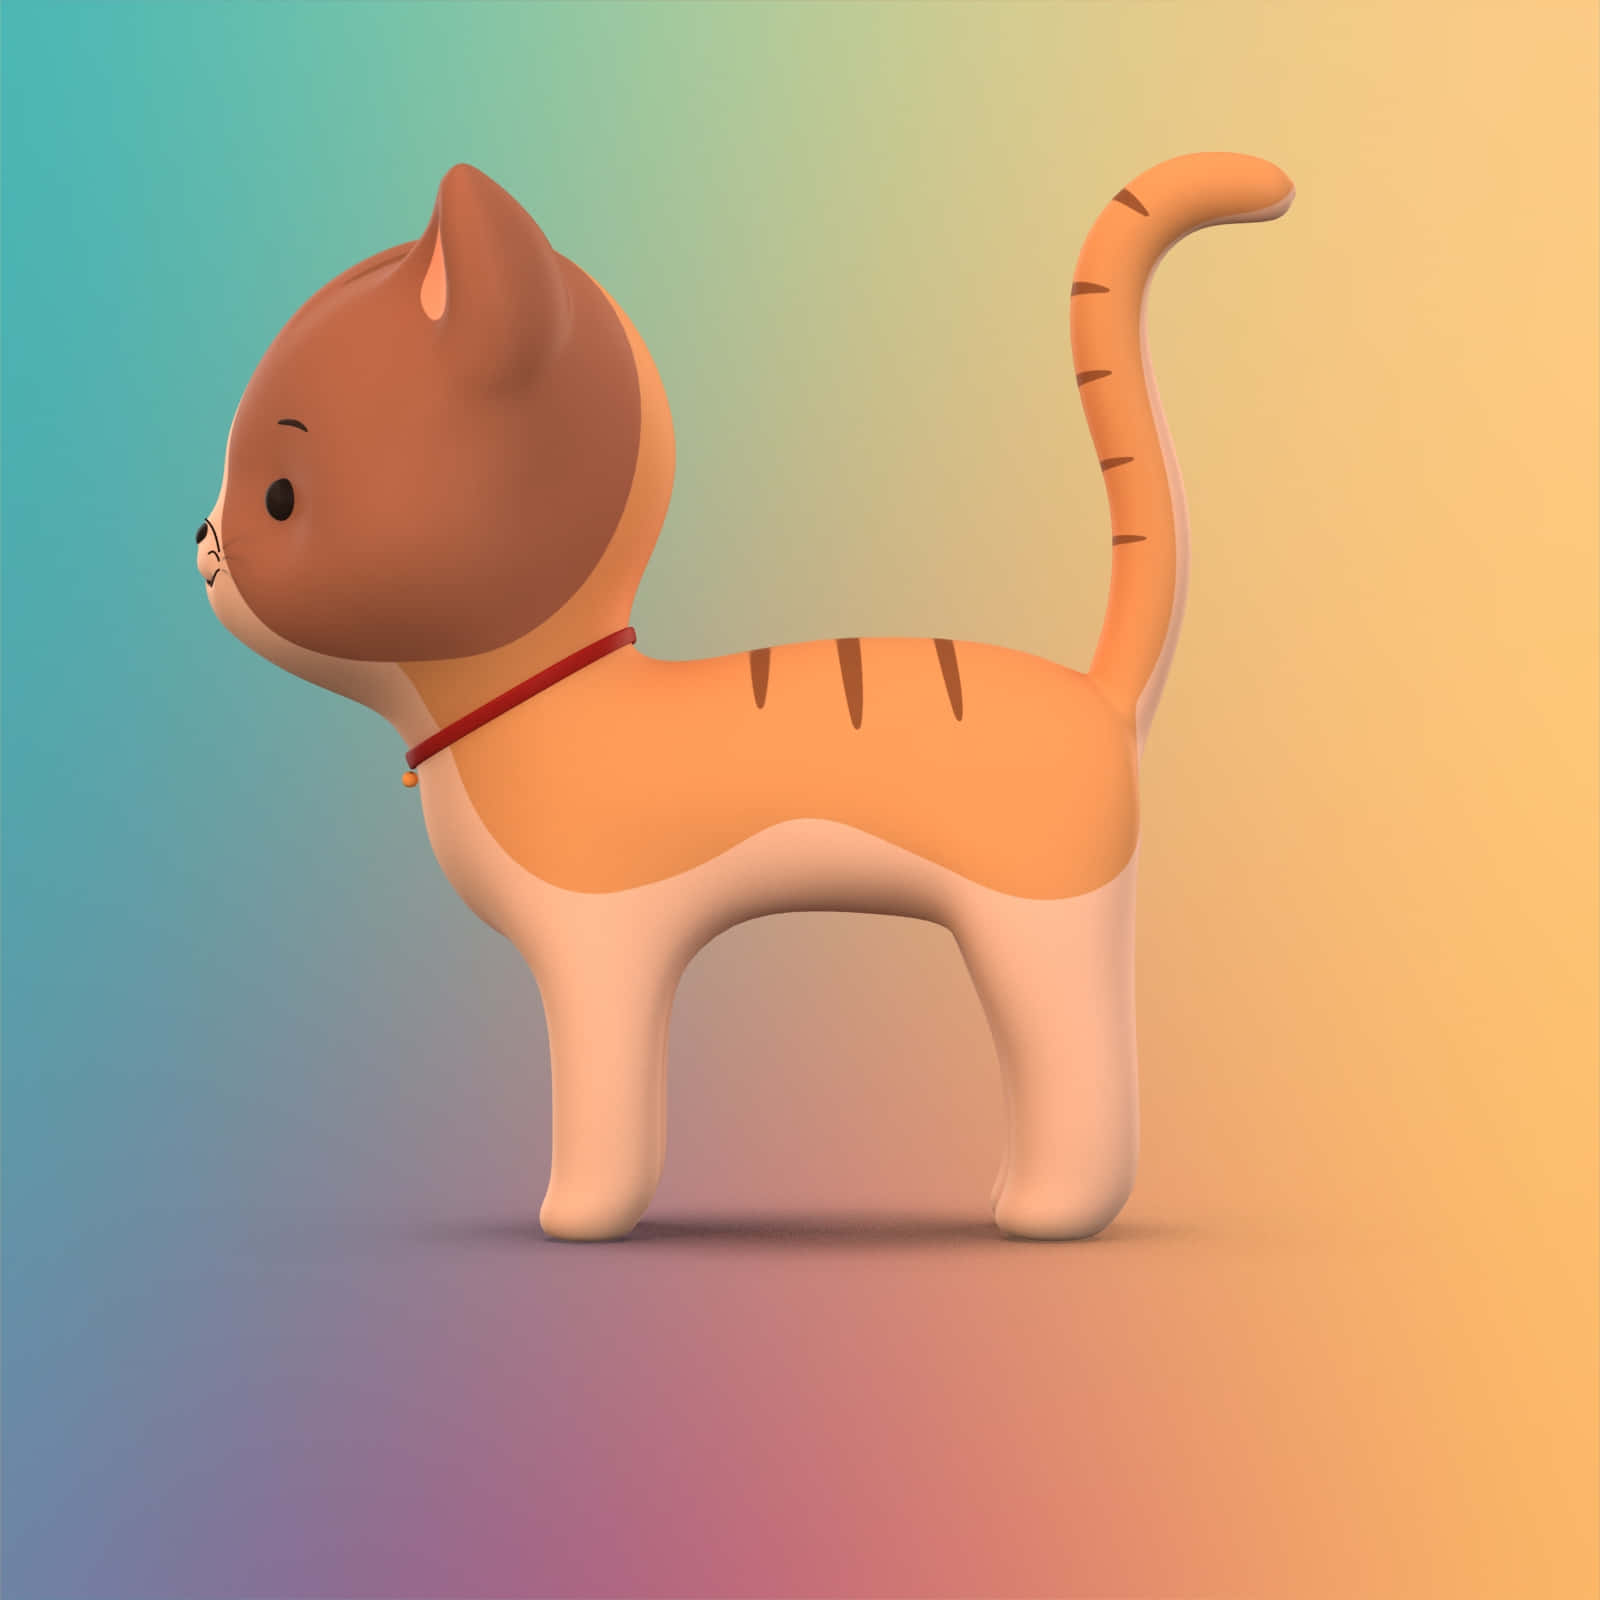 A Cartoon Cat On A Colorful Background